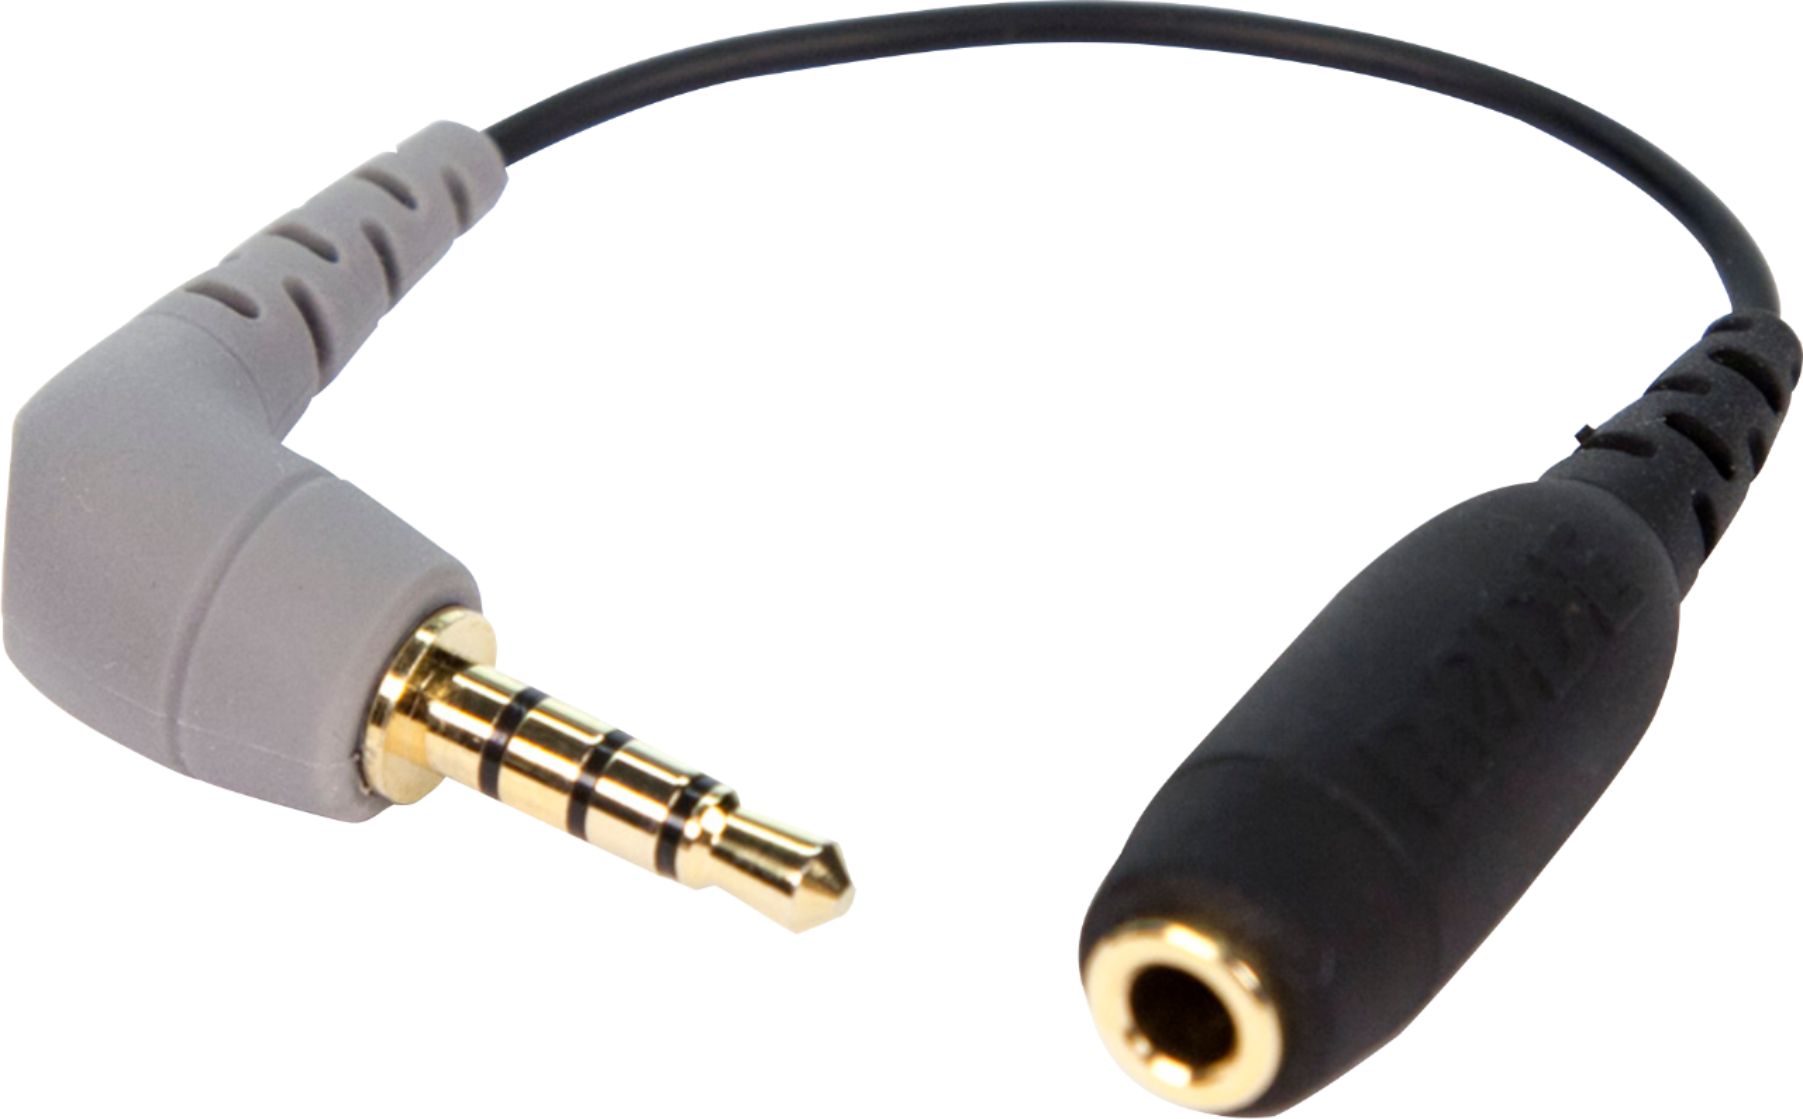 Radio Shack Htx-10 6 Pin Mic Adapter Jack to Galaxy 4pins Female Microphone Plug for sale online 